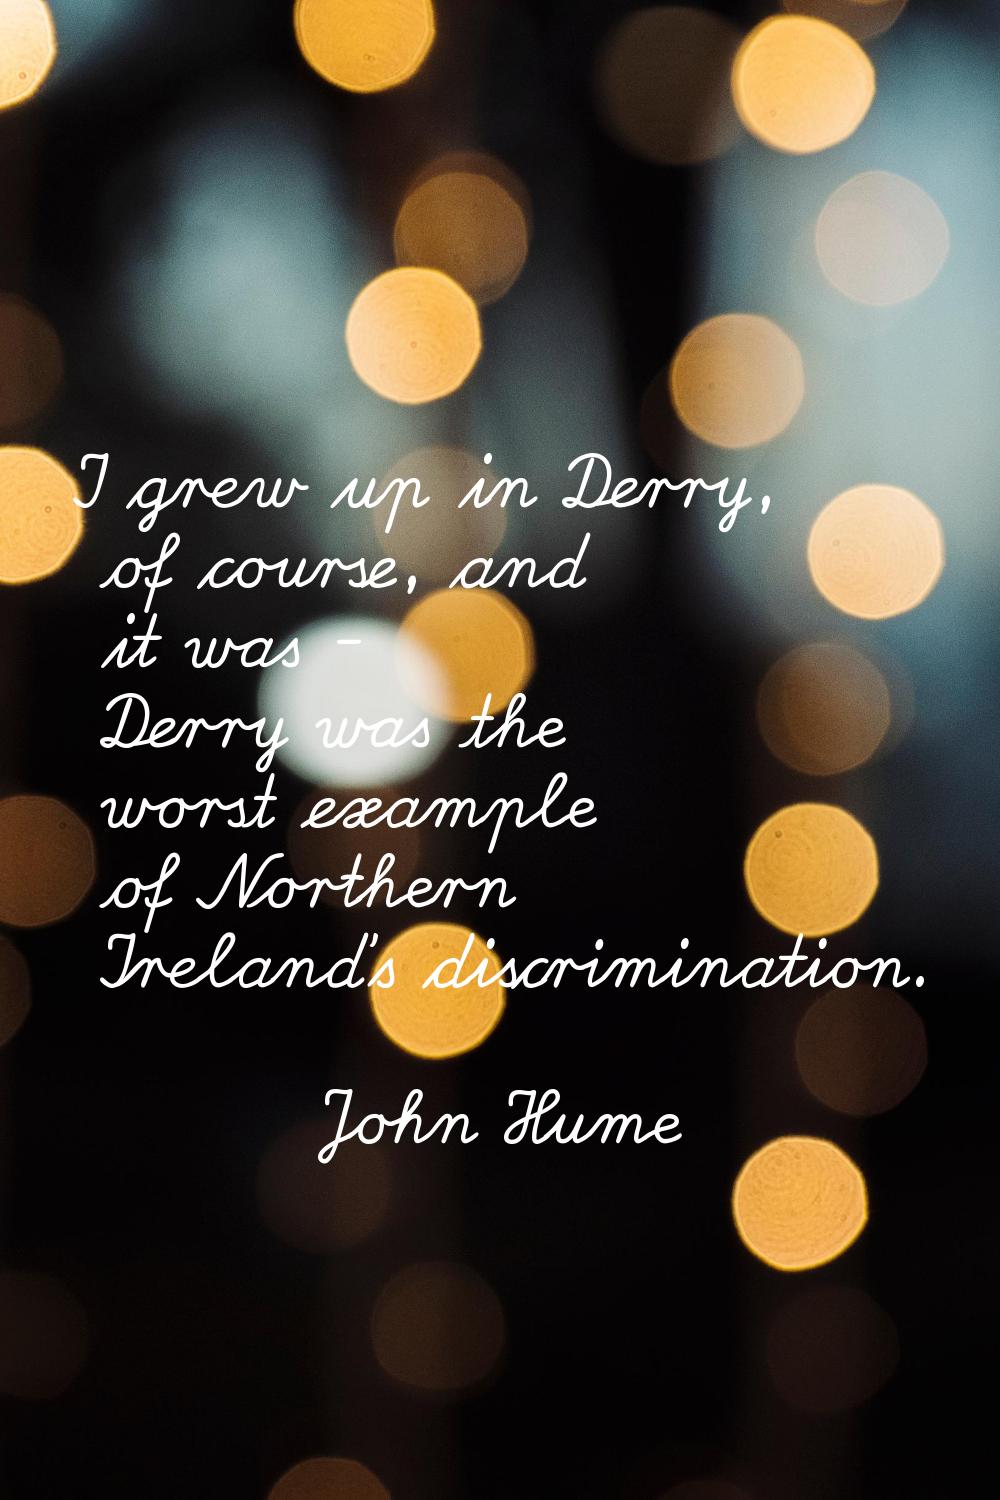 I grew up in Derry, of course, and it was - Derry was the worst example of Northern Ireland's discr